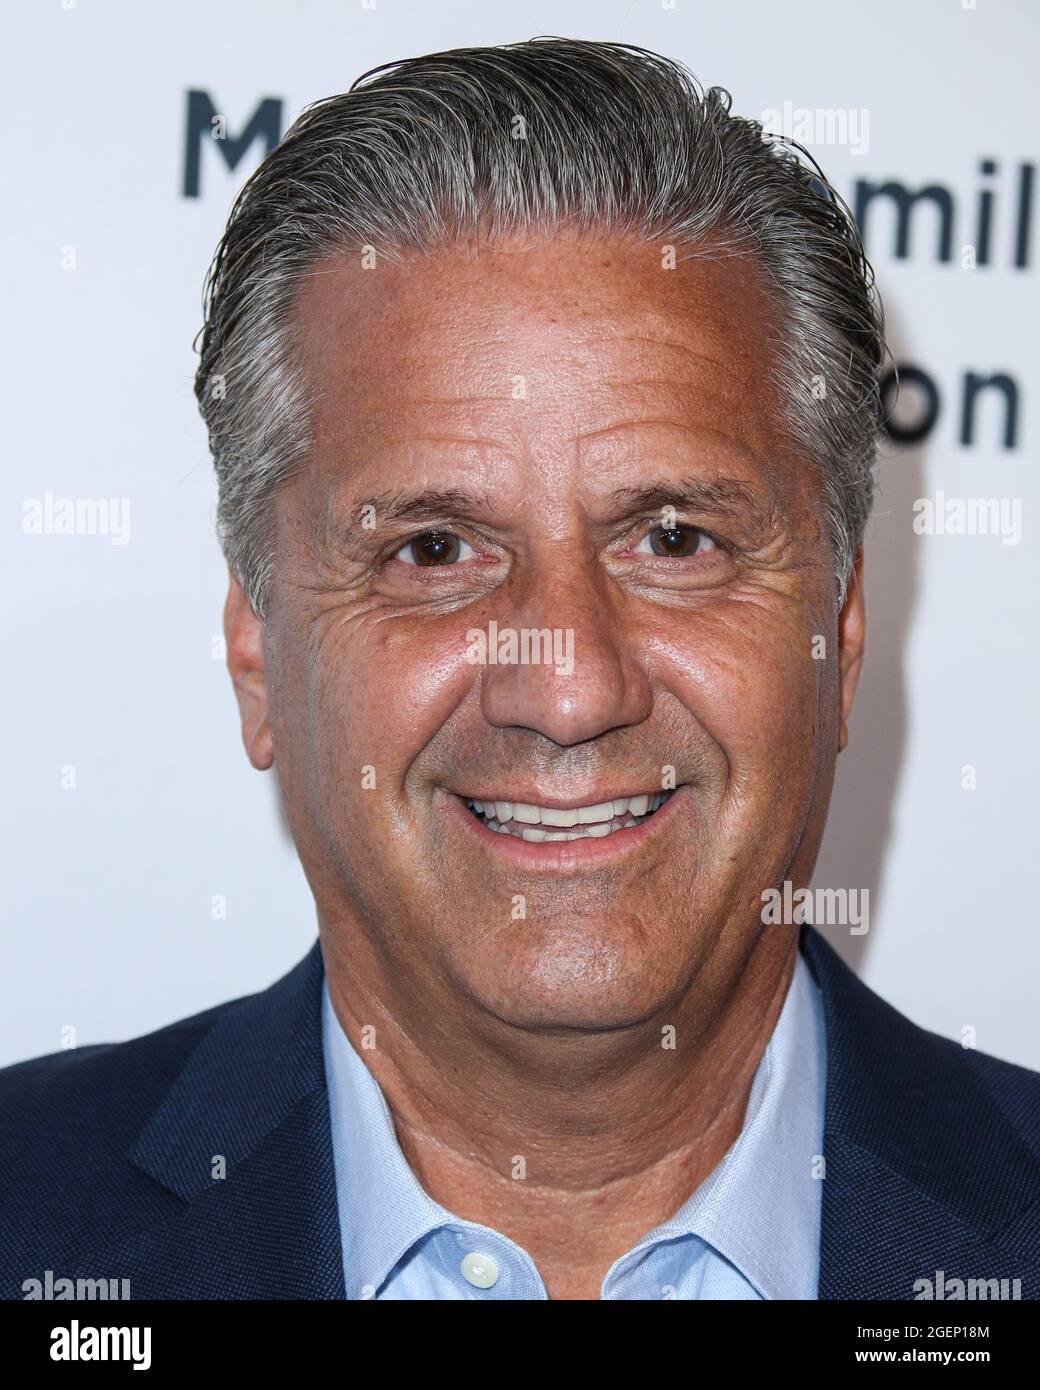 Beverly Hills, USA. 20th Aug, 2021. BEVERLY HILLS, LOS ANGELES, CALIFORNIA, USA - AUGUST 20: American basketball coach John Calipari arrives at the 21st Annual Harold and Carole Pump Foundation Gala held at The Beverly Hilton Hotel on August 20, 2021 in Beverly Hills, Los Angeles, California, USA. (Photo by Xavier Collin/Image Press Agency) Credit: Image Press Agency/Alamy Live News Stock Photo